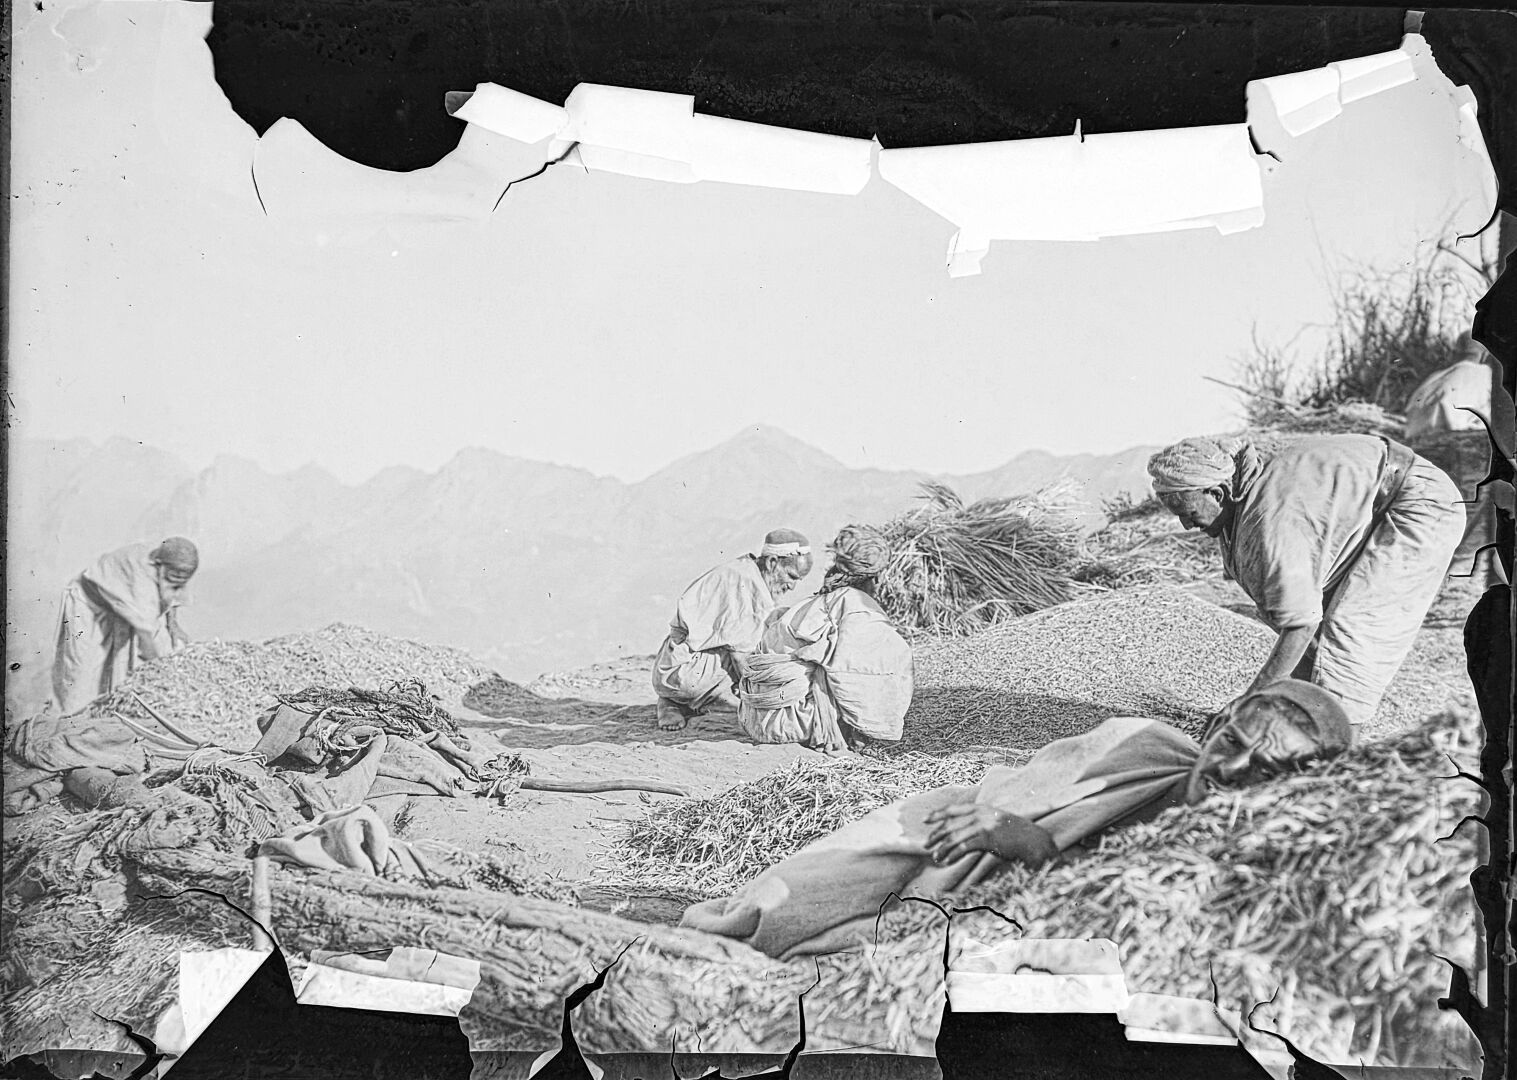 Please read (see ALT for description in german): 
I rarely post photos by other photographers. This historical photo was taken by the doctor Harriet Straub, who worked with Bedouins in Algeria around 1900 on behalf of the French government. A friend of mine inherited about 100 old glass plate negatives from her estate. I have digitized the photo above because the negative emulsion is beginning to separate from the carrier glass due to its age, which can be clearly seen in the frayed edges of the digital copy.

The photo was taken during Harriet's time in the Tamanrasset area in the Ahaggar Mountains and shows locals harvesting grain.
I think the photo is great, beautiful and worth showing because it is so timelessly vivid. Can you spot the man at rest?